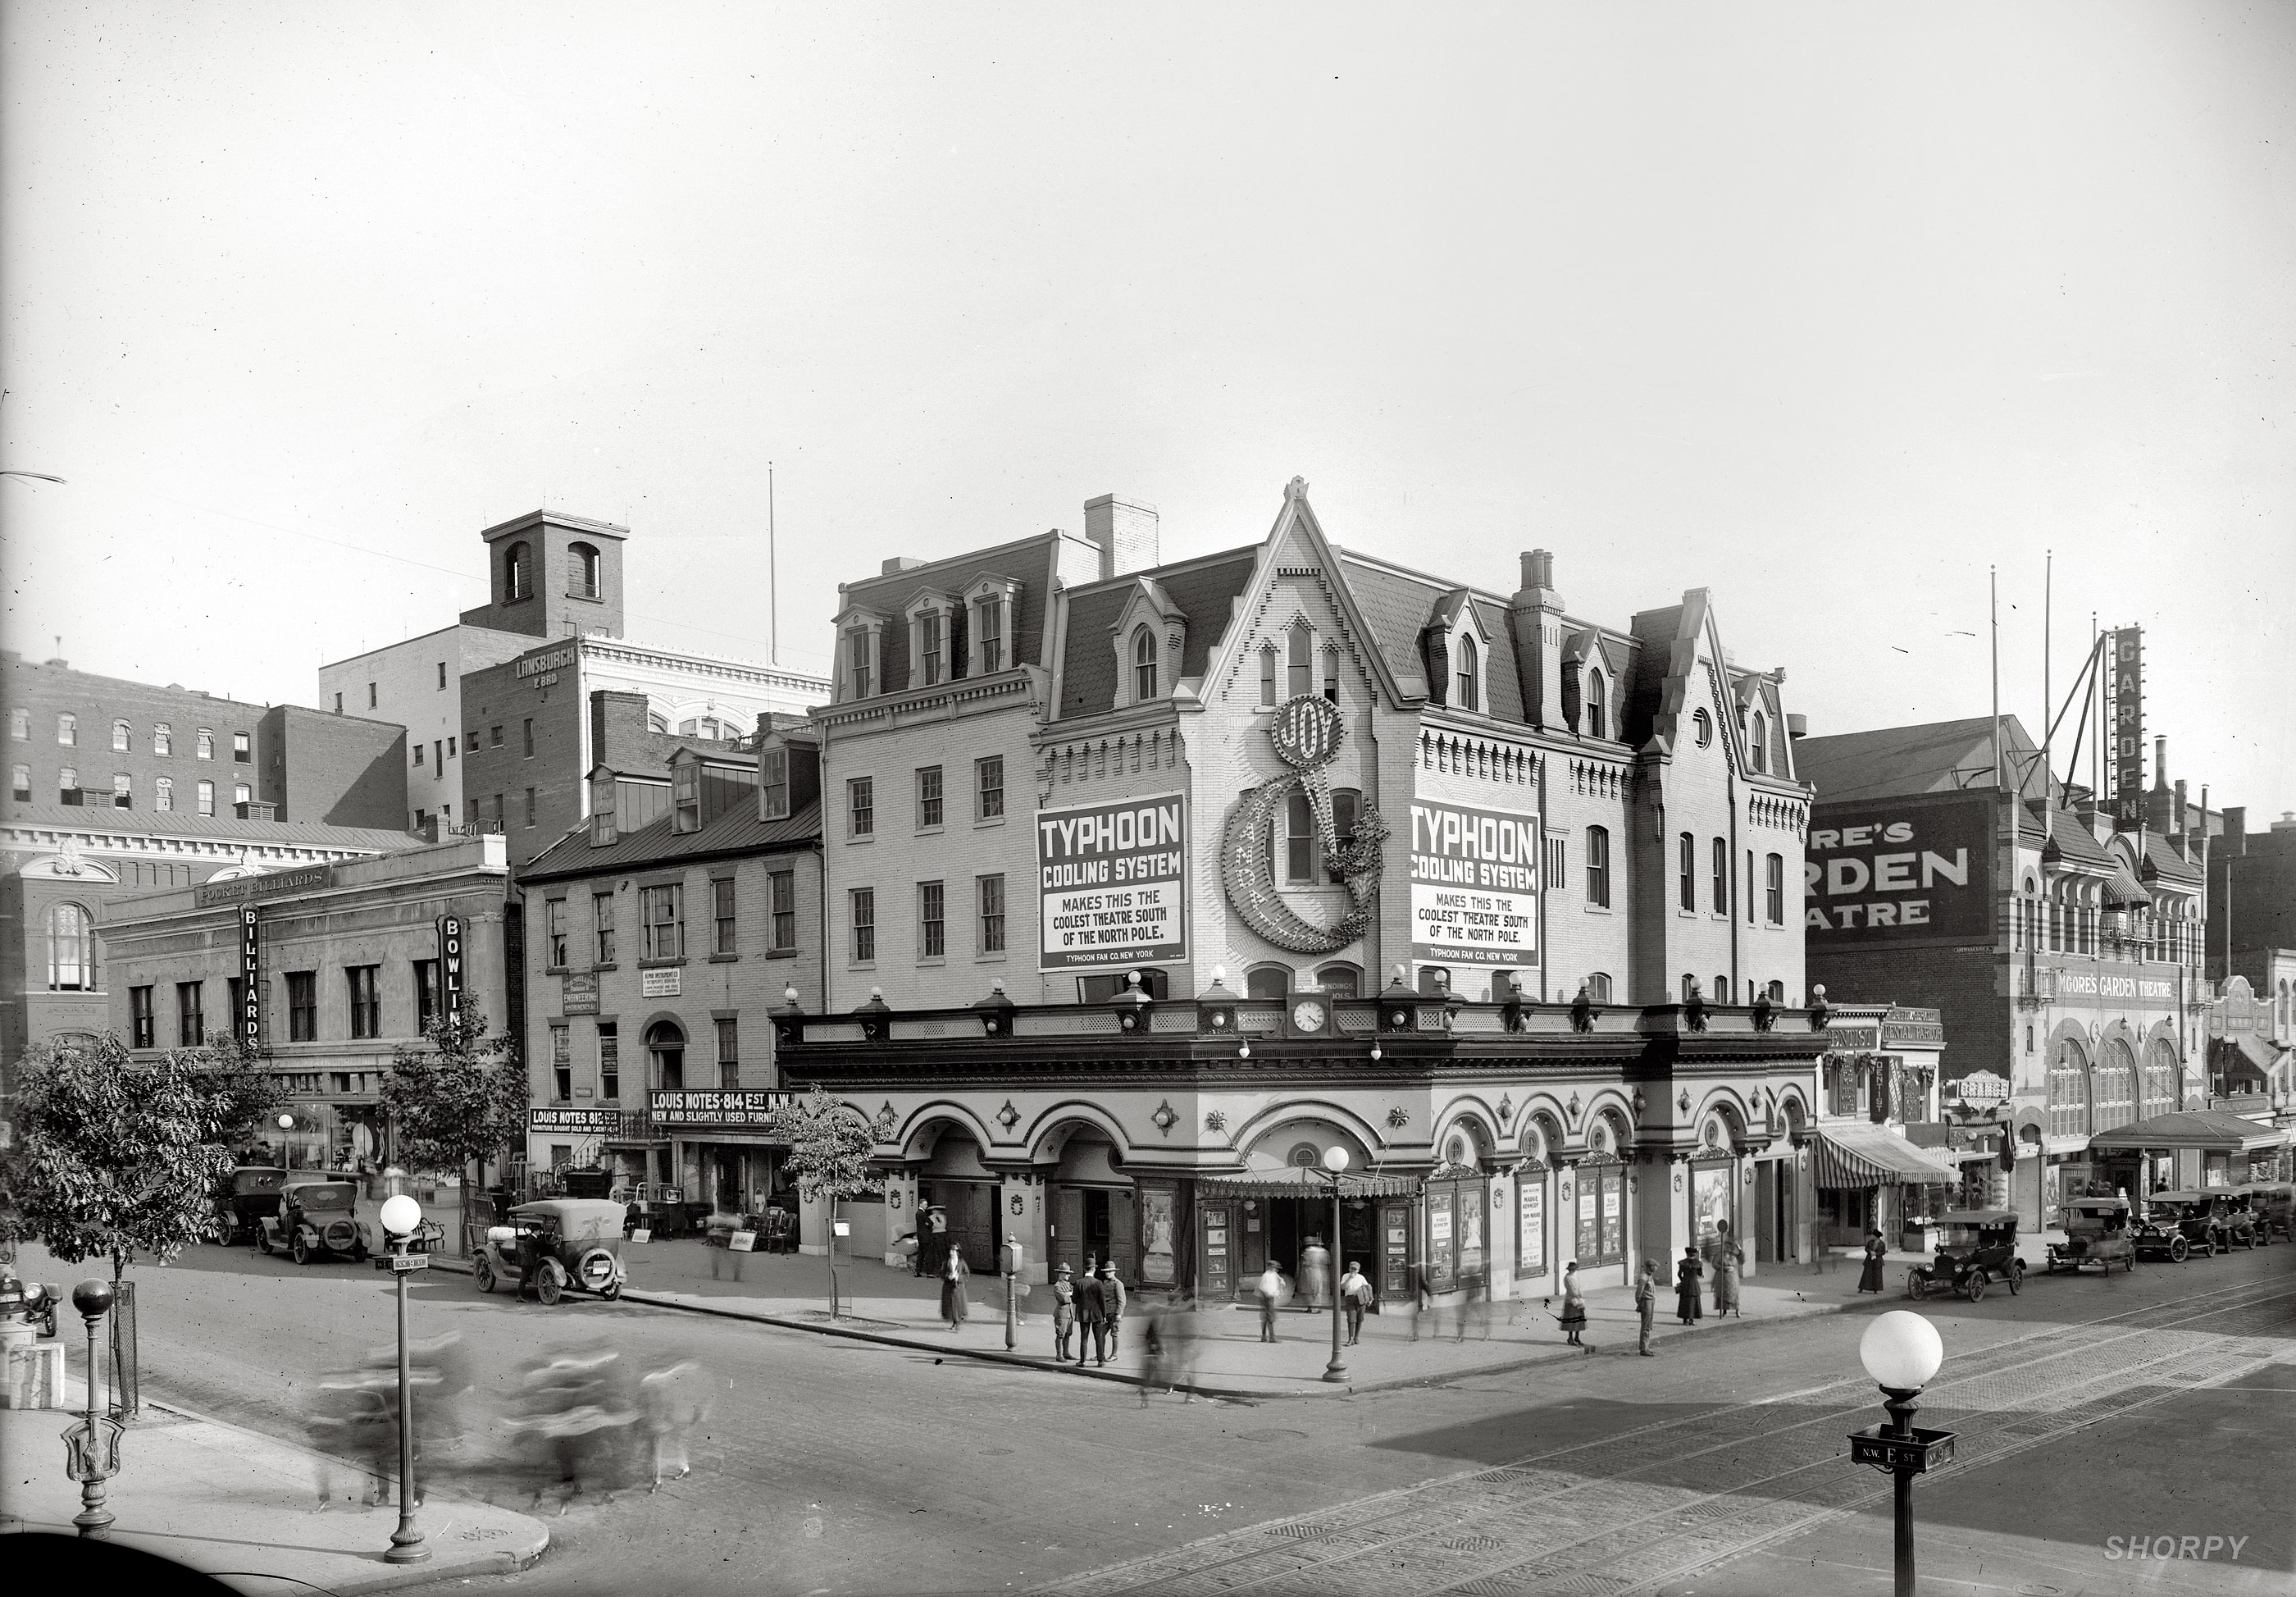 Washington movie houses circa 1918. "Crandall's Theater, 9th & E Streets N.W." Now playing: Madge Kennedy and Tom Moore in "The Kingdom of Youth." National Photo Company Collection glass negative. View full size.